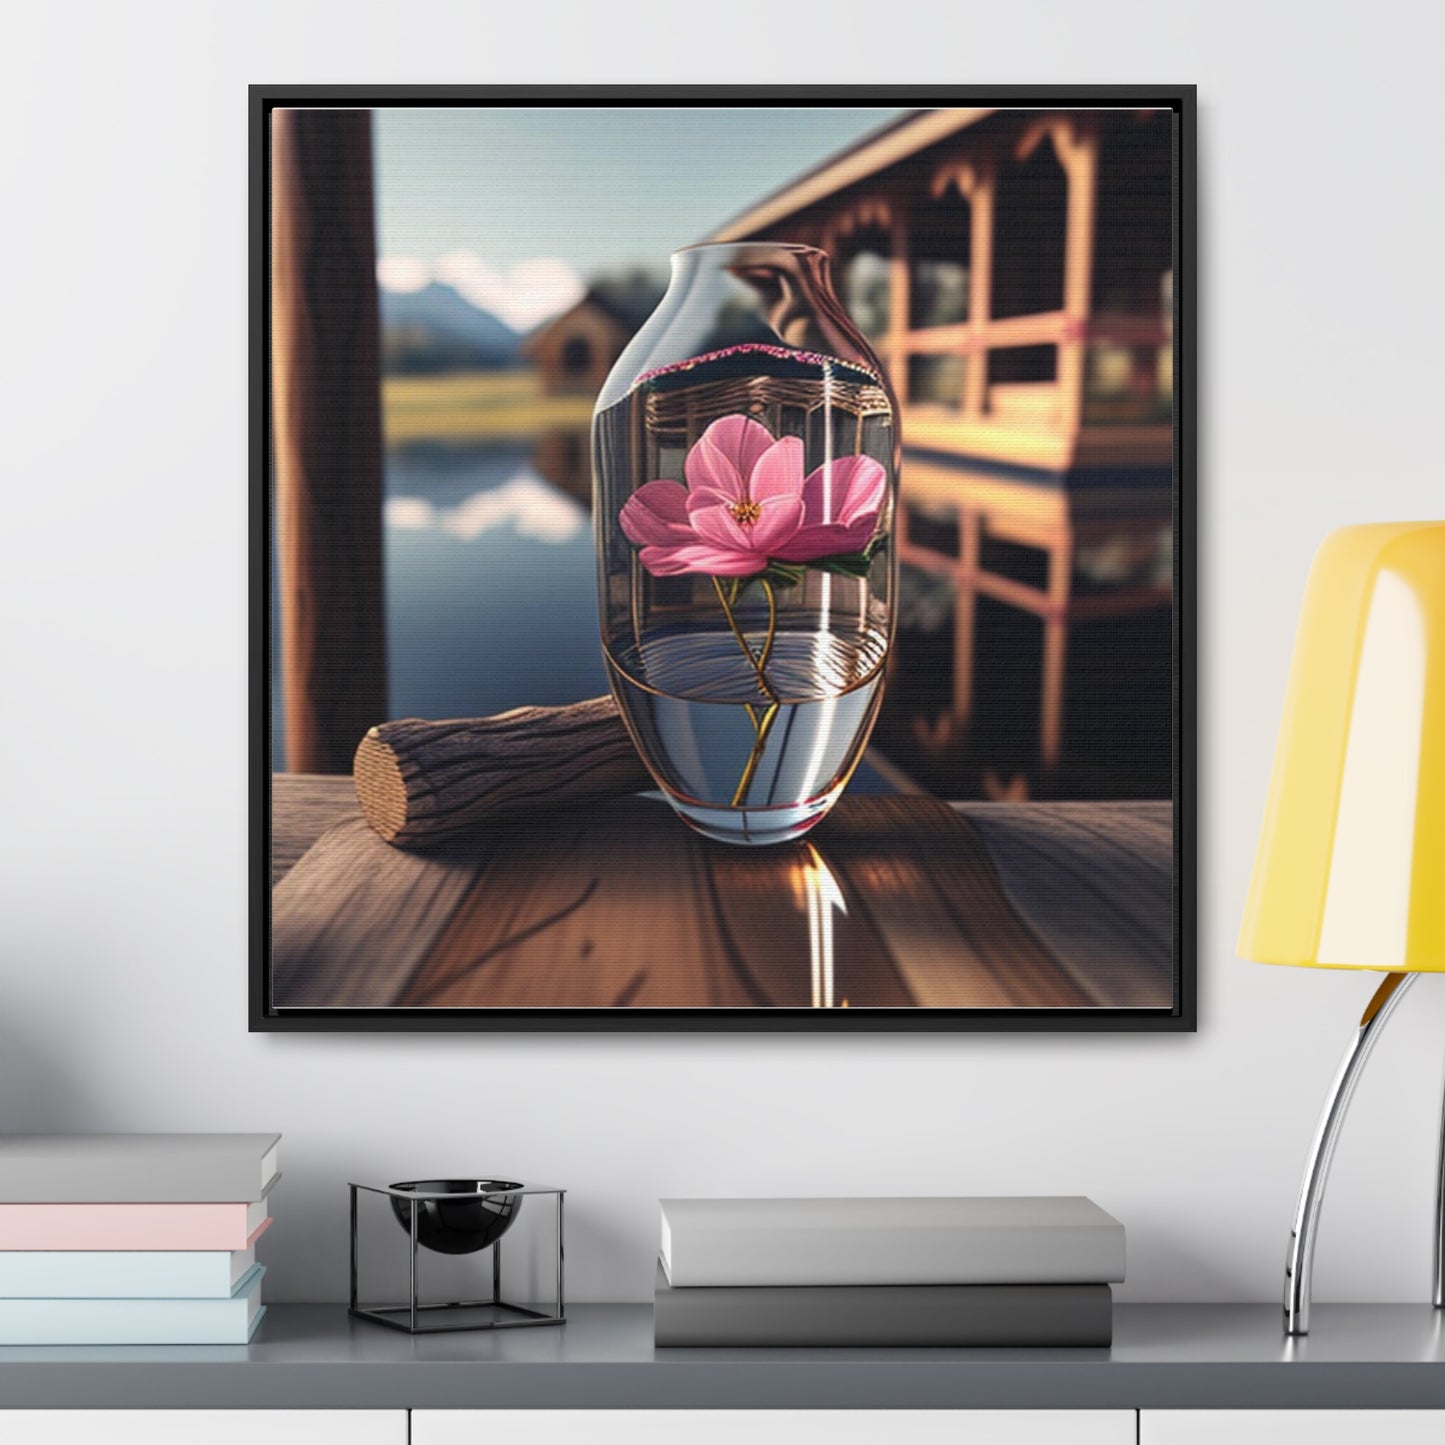 Gallery Canvas Wraps, Square Frame Pink Magnolia 4